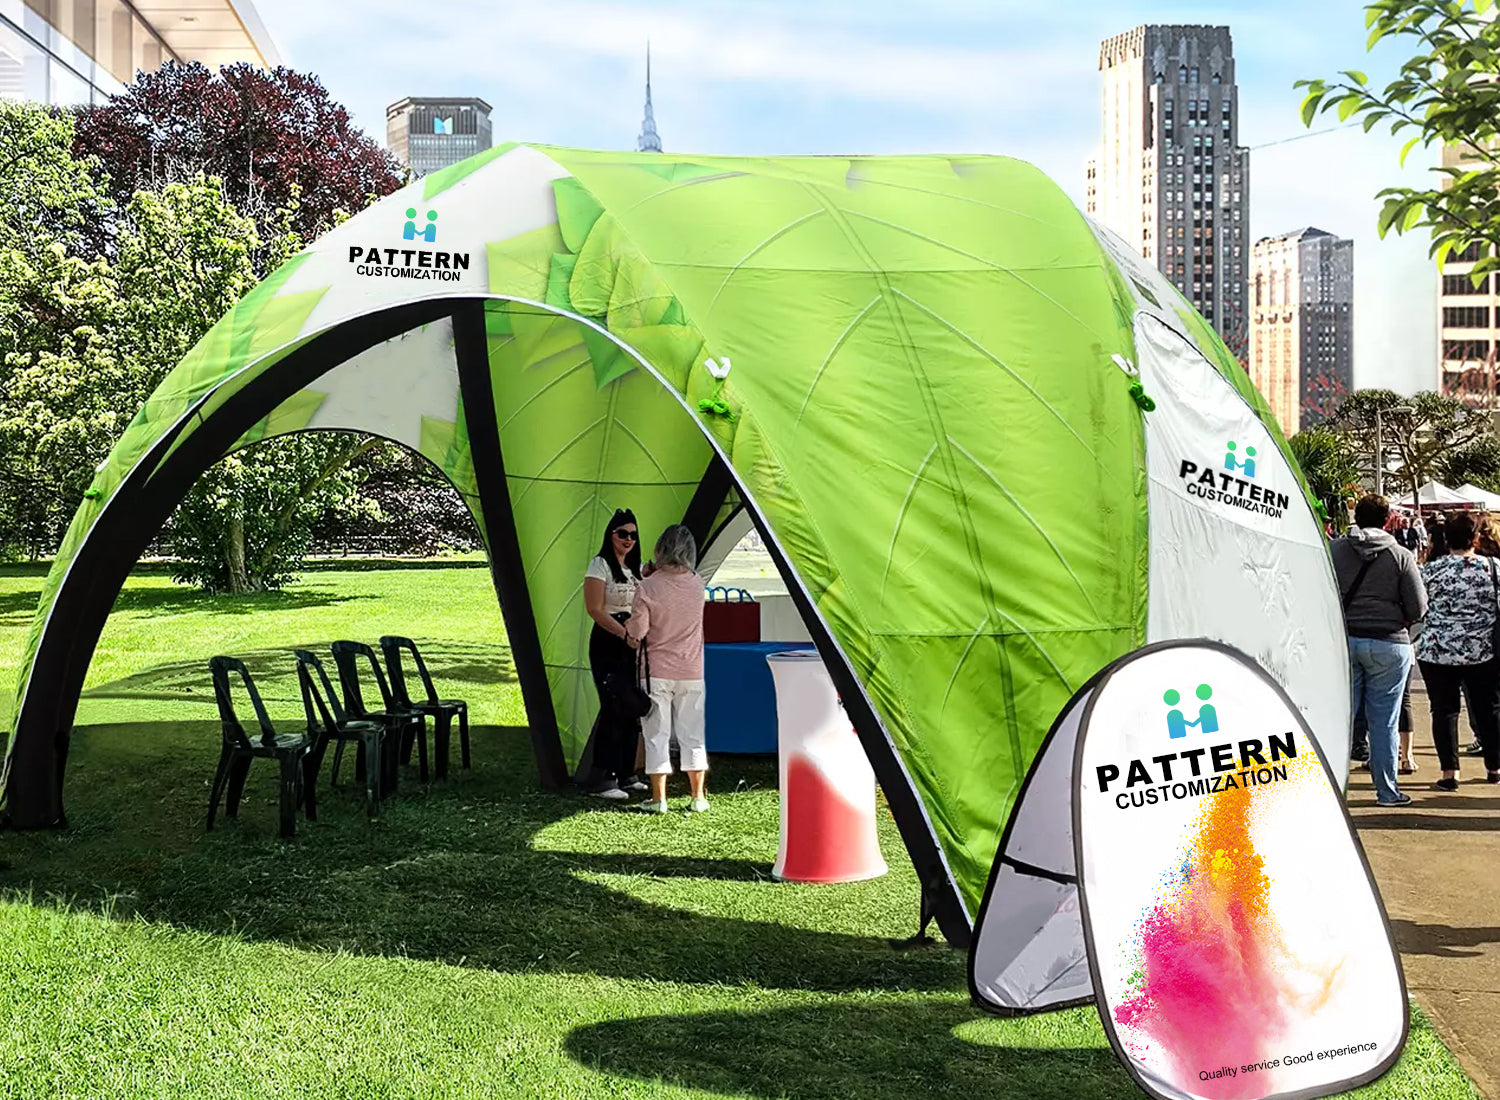 inflatables - TENTS AND INFLATABLES FOR MARKETING AND EVENT NEEDS